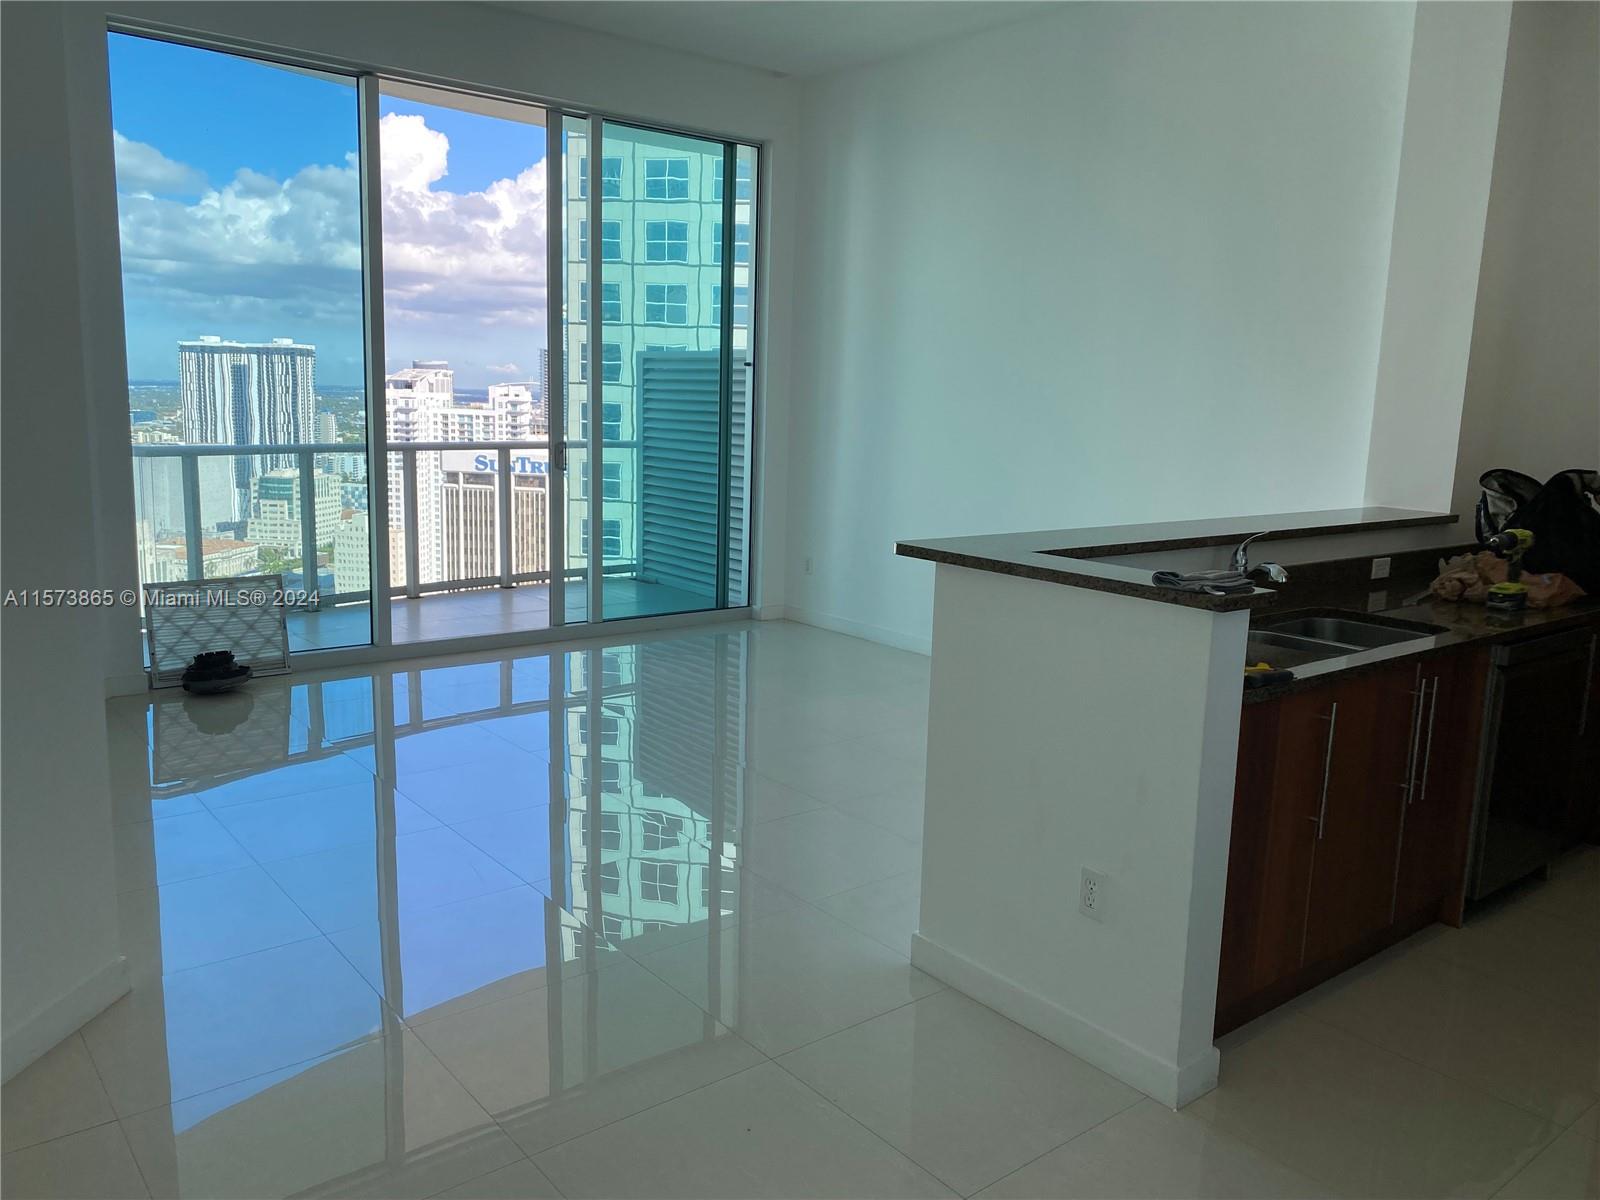 Beautiful Penthouse unit with city views. Live and play in Downtown Miami, walking distance to the best of Brickell and a 5-minute ride to the Arts District. Steps away to Whole Foods, Met Square, Silver Spot Cinema and restaurants. Walking distance to Metro Mover, Bayside Marketplace, American Airlines Arena, Adrienne Arsht Center Performing Arts and Miami Financial District. Spacious unit offers high ceilings, beautiful floors throughout, nice kitchen with SS appliances, granite counter tops and wood cabinetry. Unit is filled with lots of natural light, windows from floor to ceiling and offers a large balcony with beautiful city views.